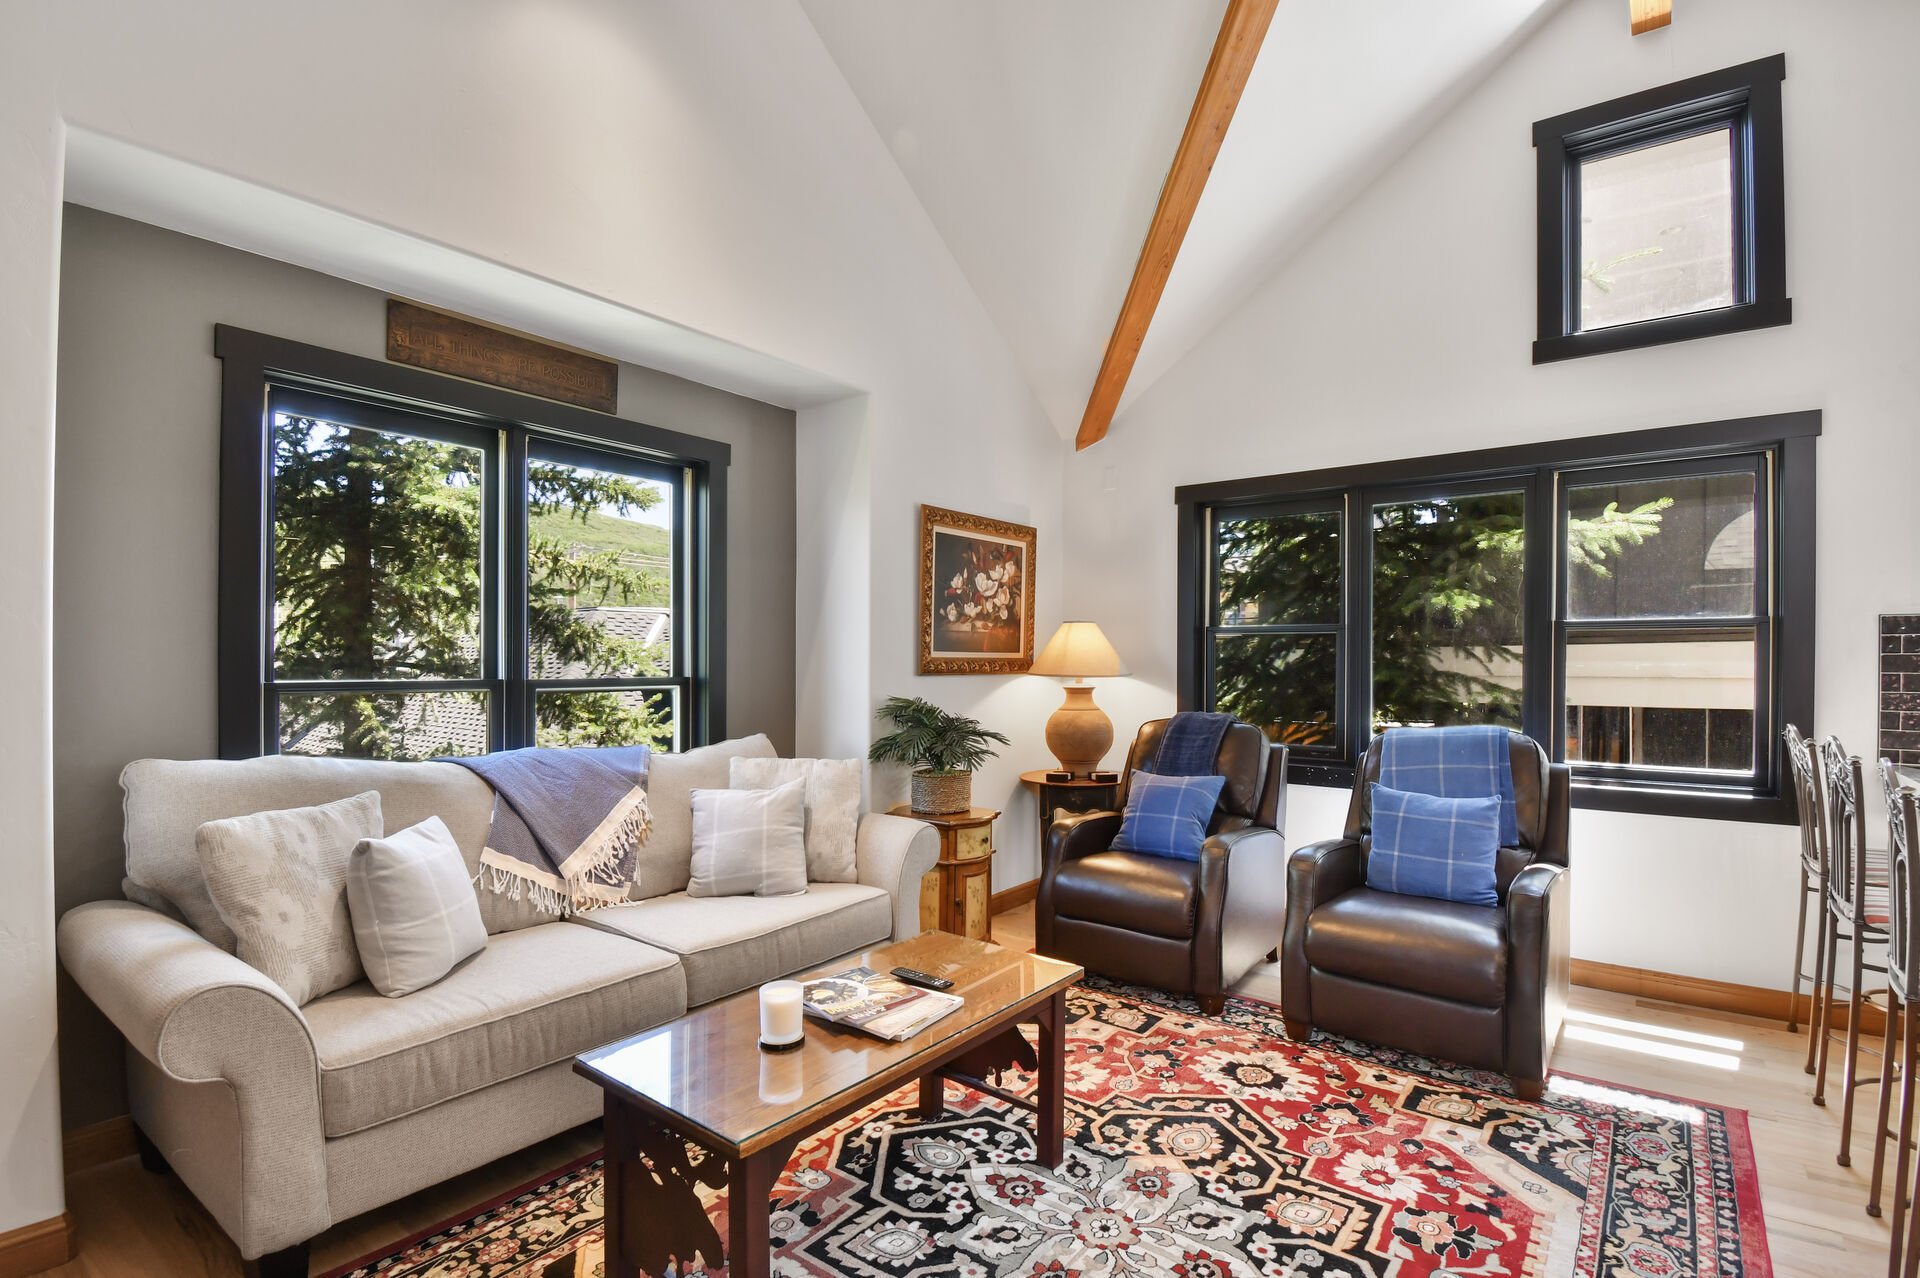 Living room with windows and gorgeous vaulted ceiling